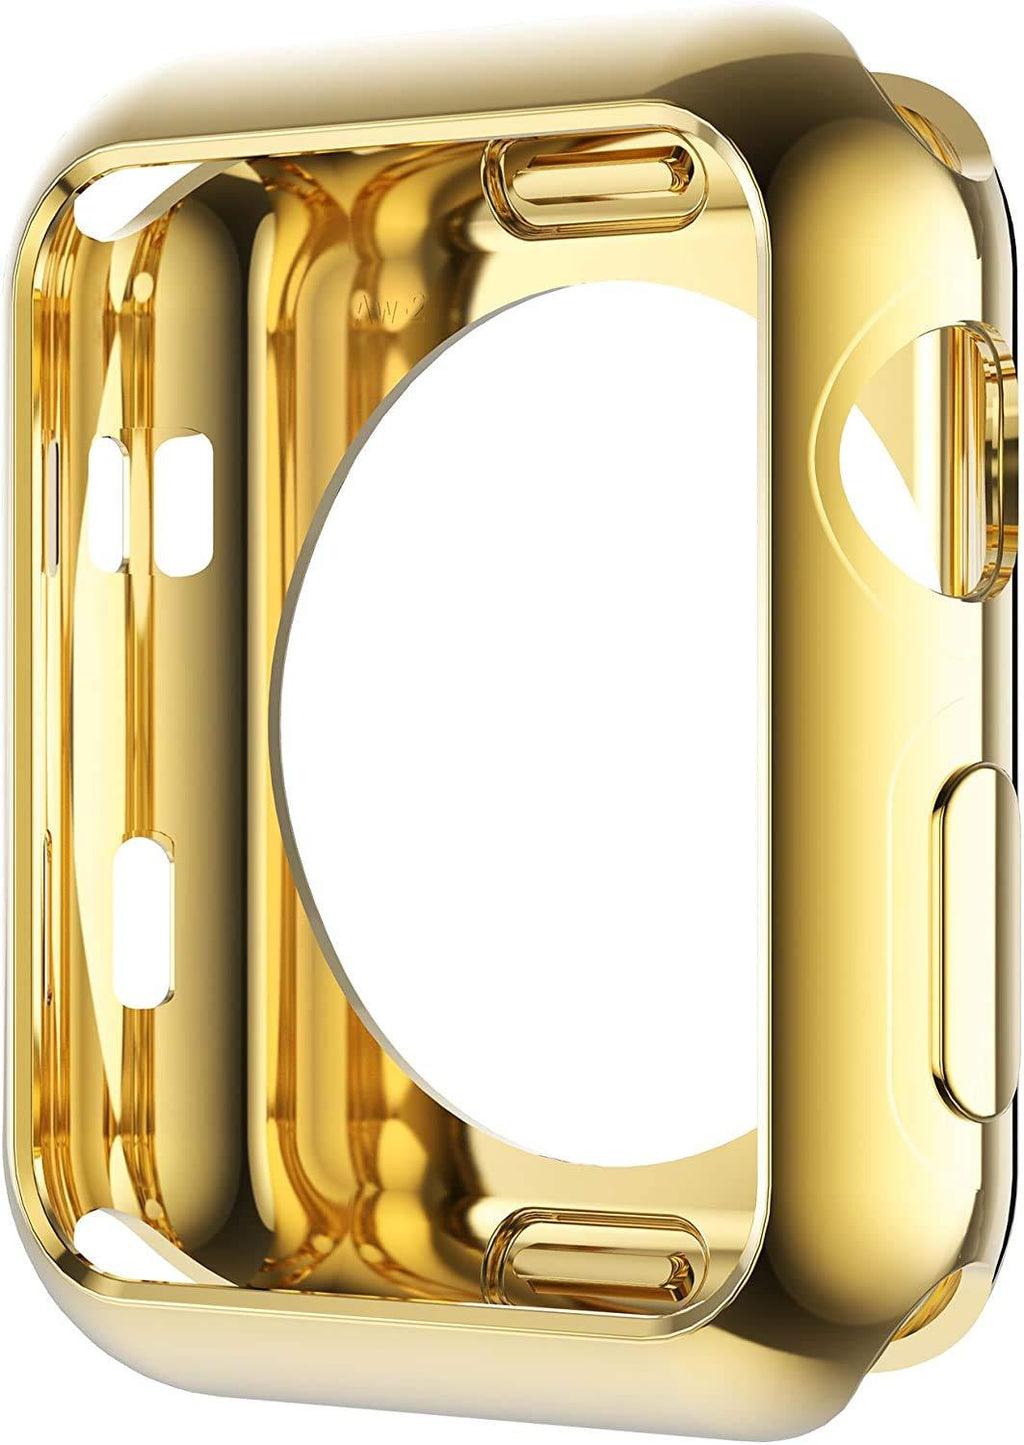 Leotop Compatible with Apple Watch Case 44mm 40mm, Soft Flexible TPU Plated Protector Bumper Shiny Cover Lightweight Thin Guard Shockproof Frame Compatible for iWatch Series 6 5 4 SE(Gold, 44mm) 44 mm Gold